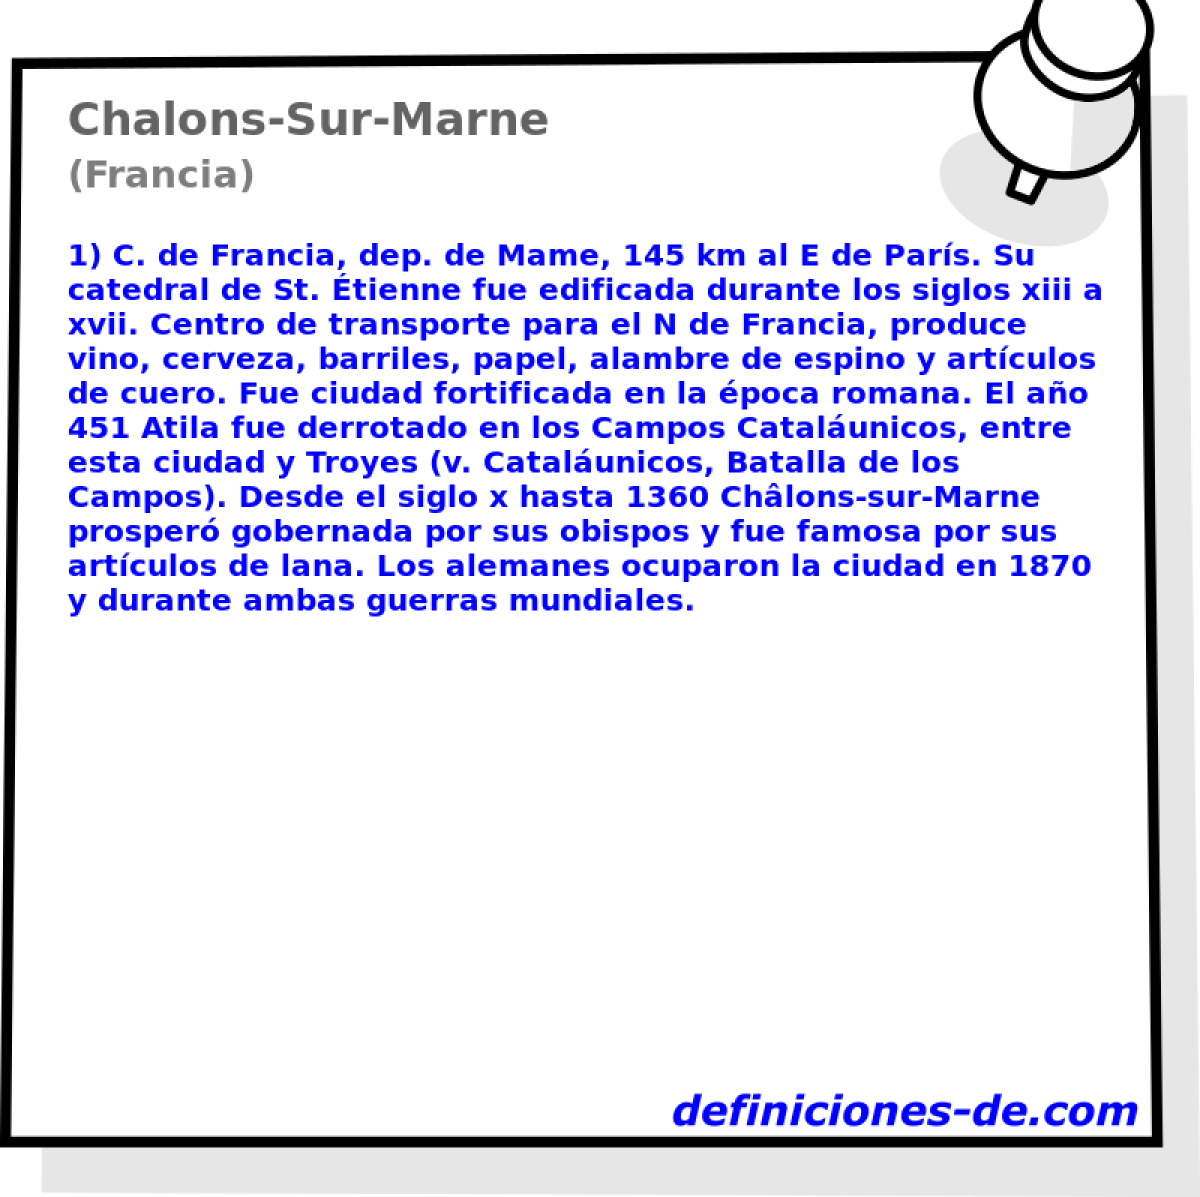 Chalons-Sur-Marne (Francia)